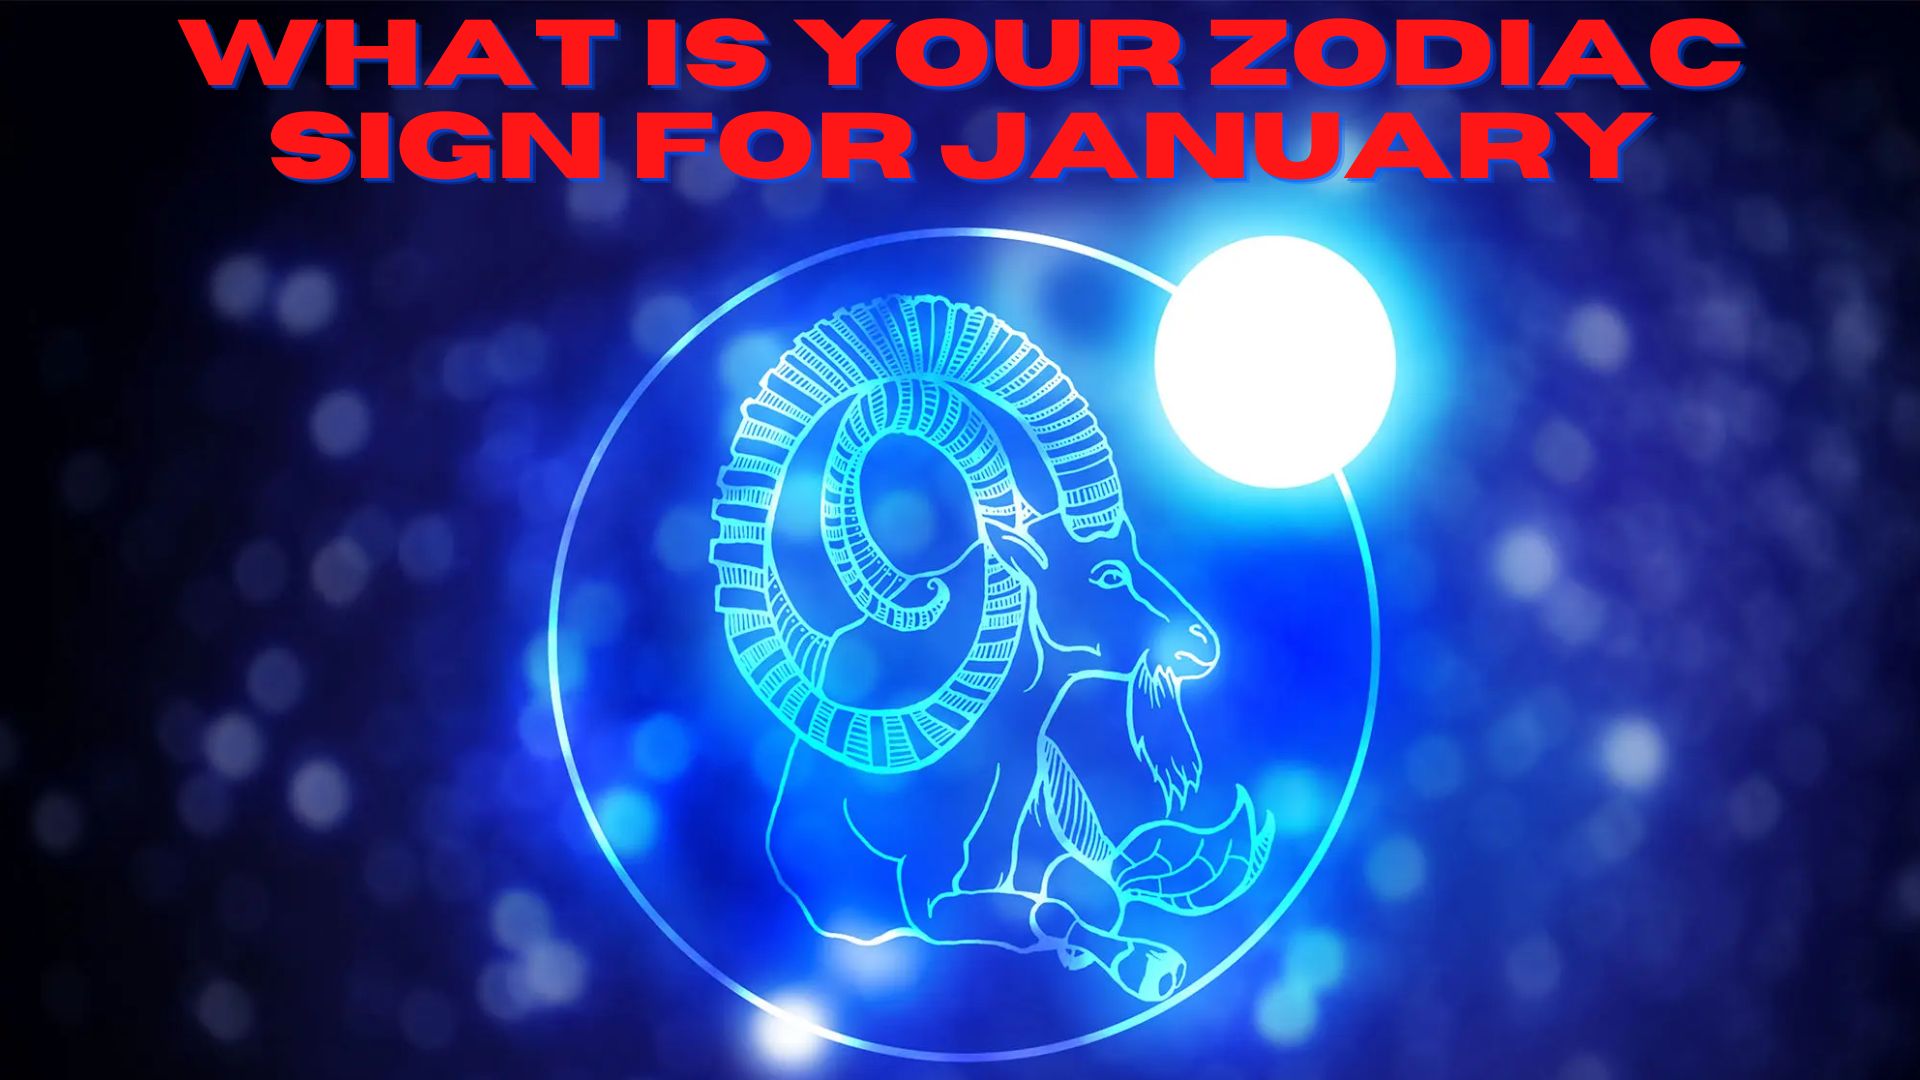 What Is Your Zodiac Sign For January?